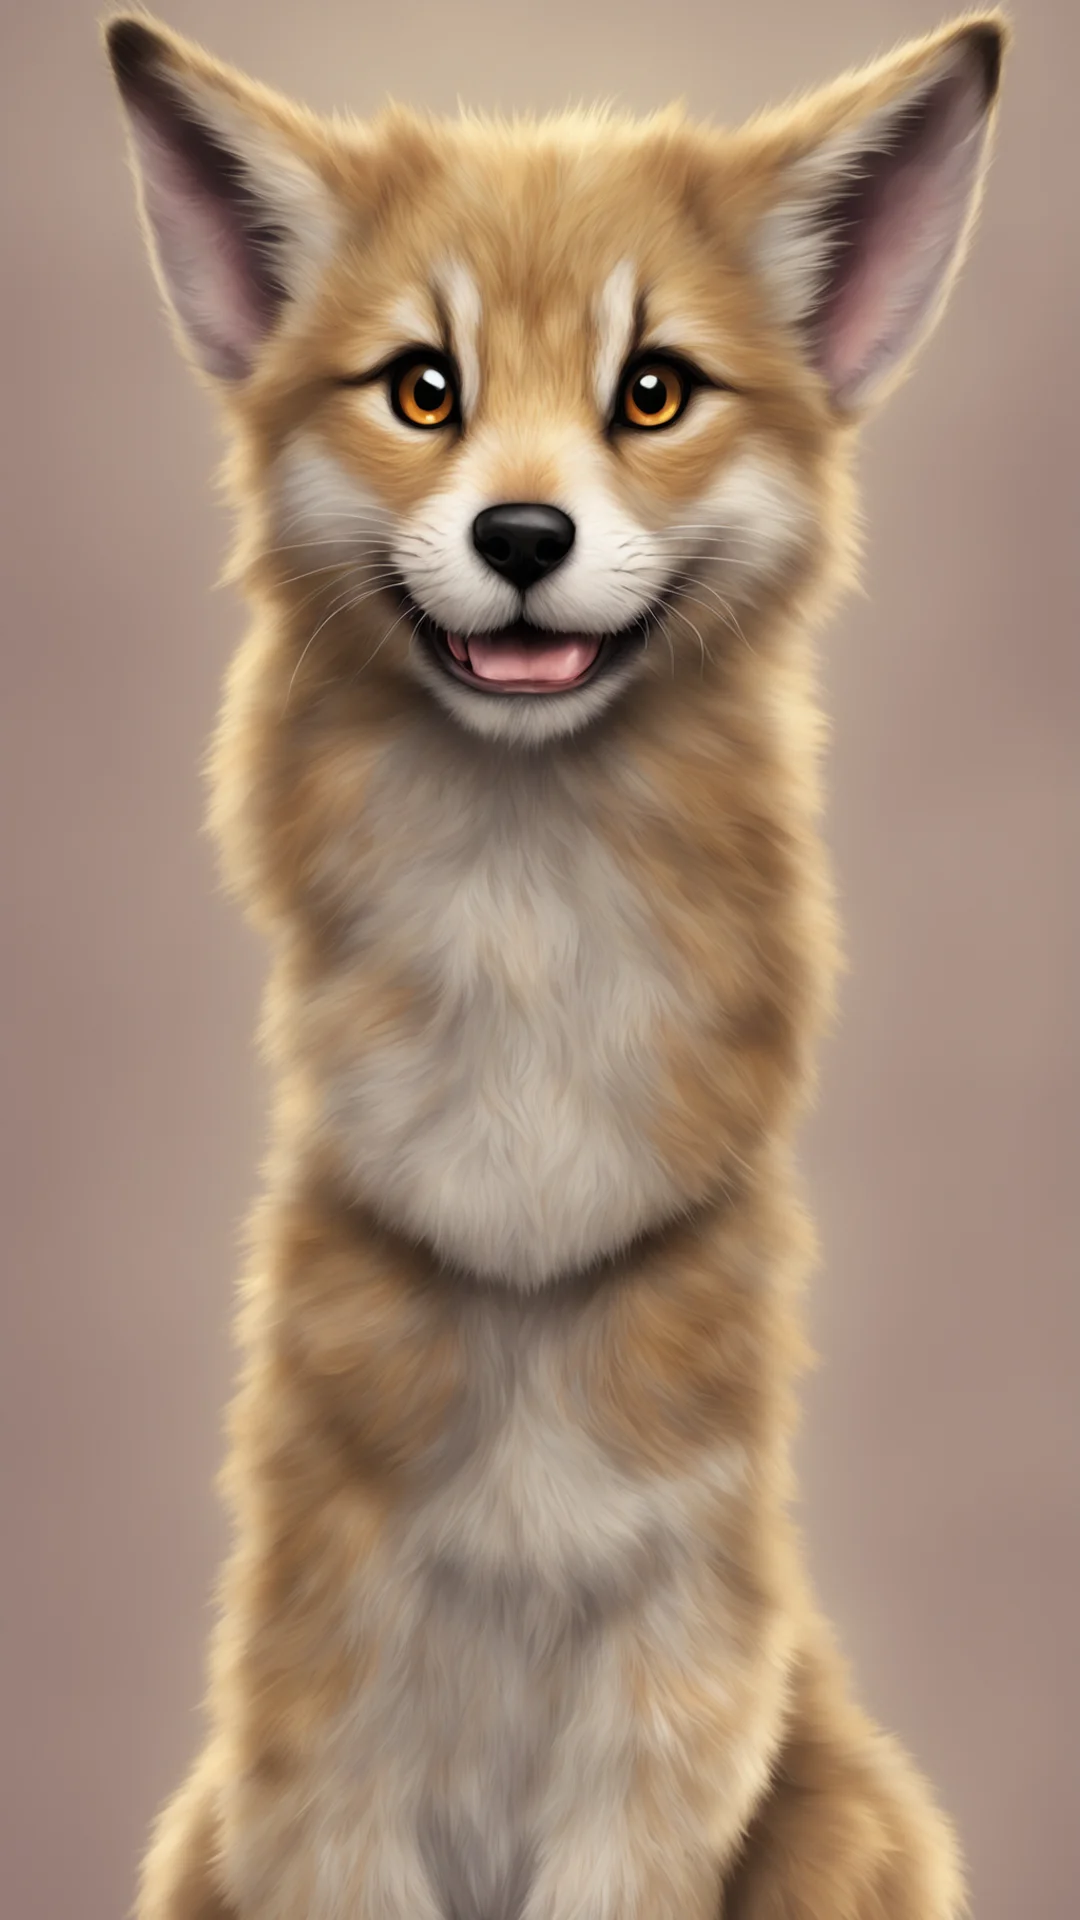 aiamazing yiff awesome portrait 2 tall